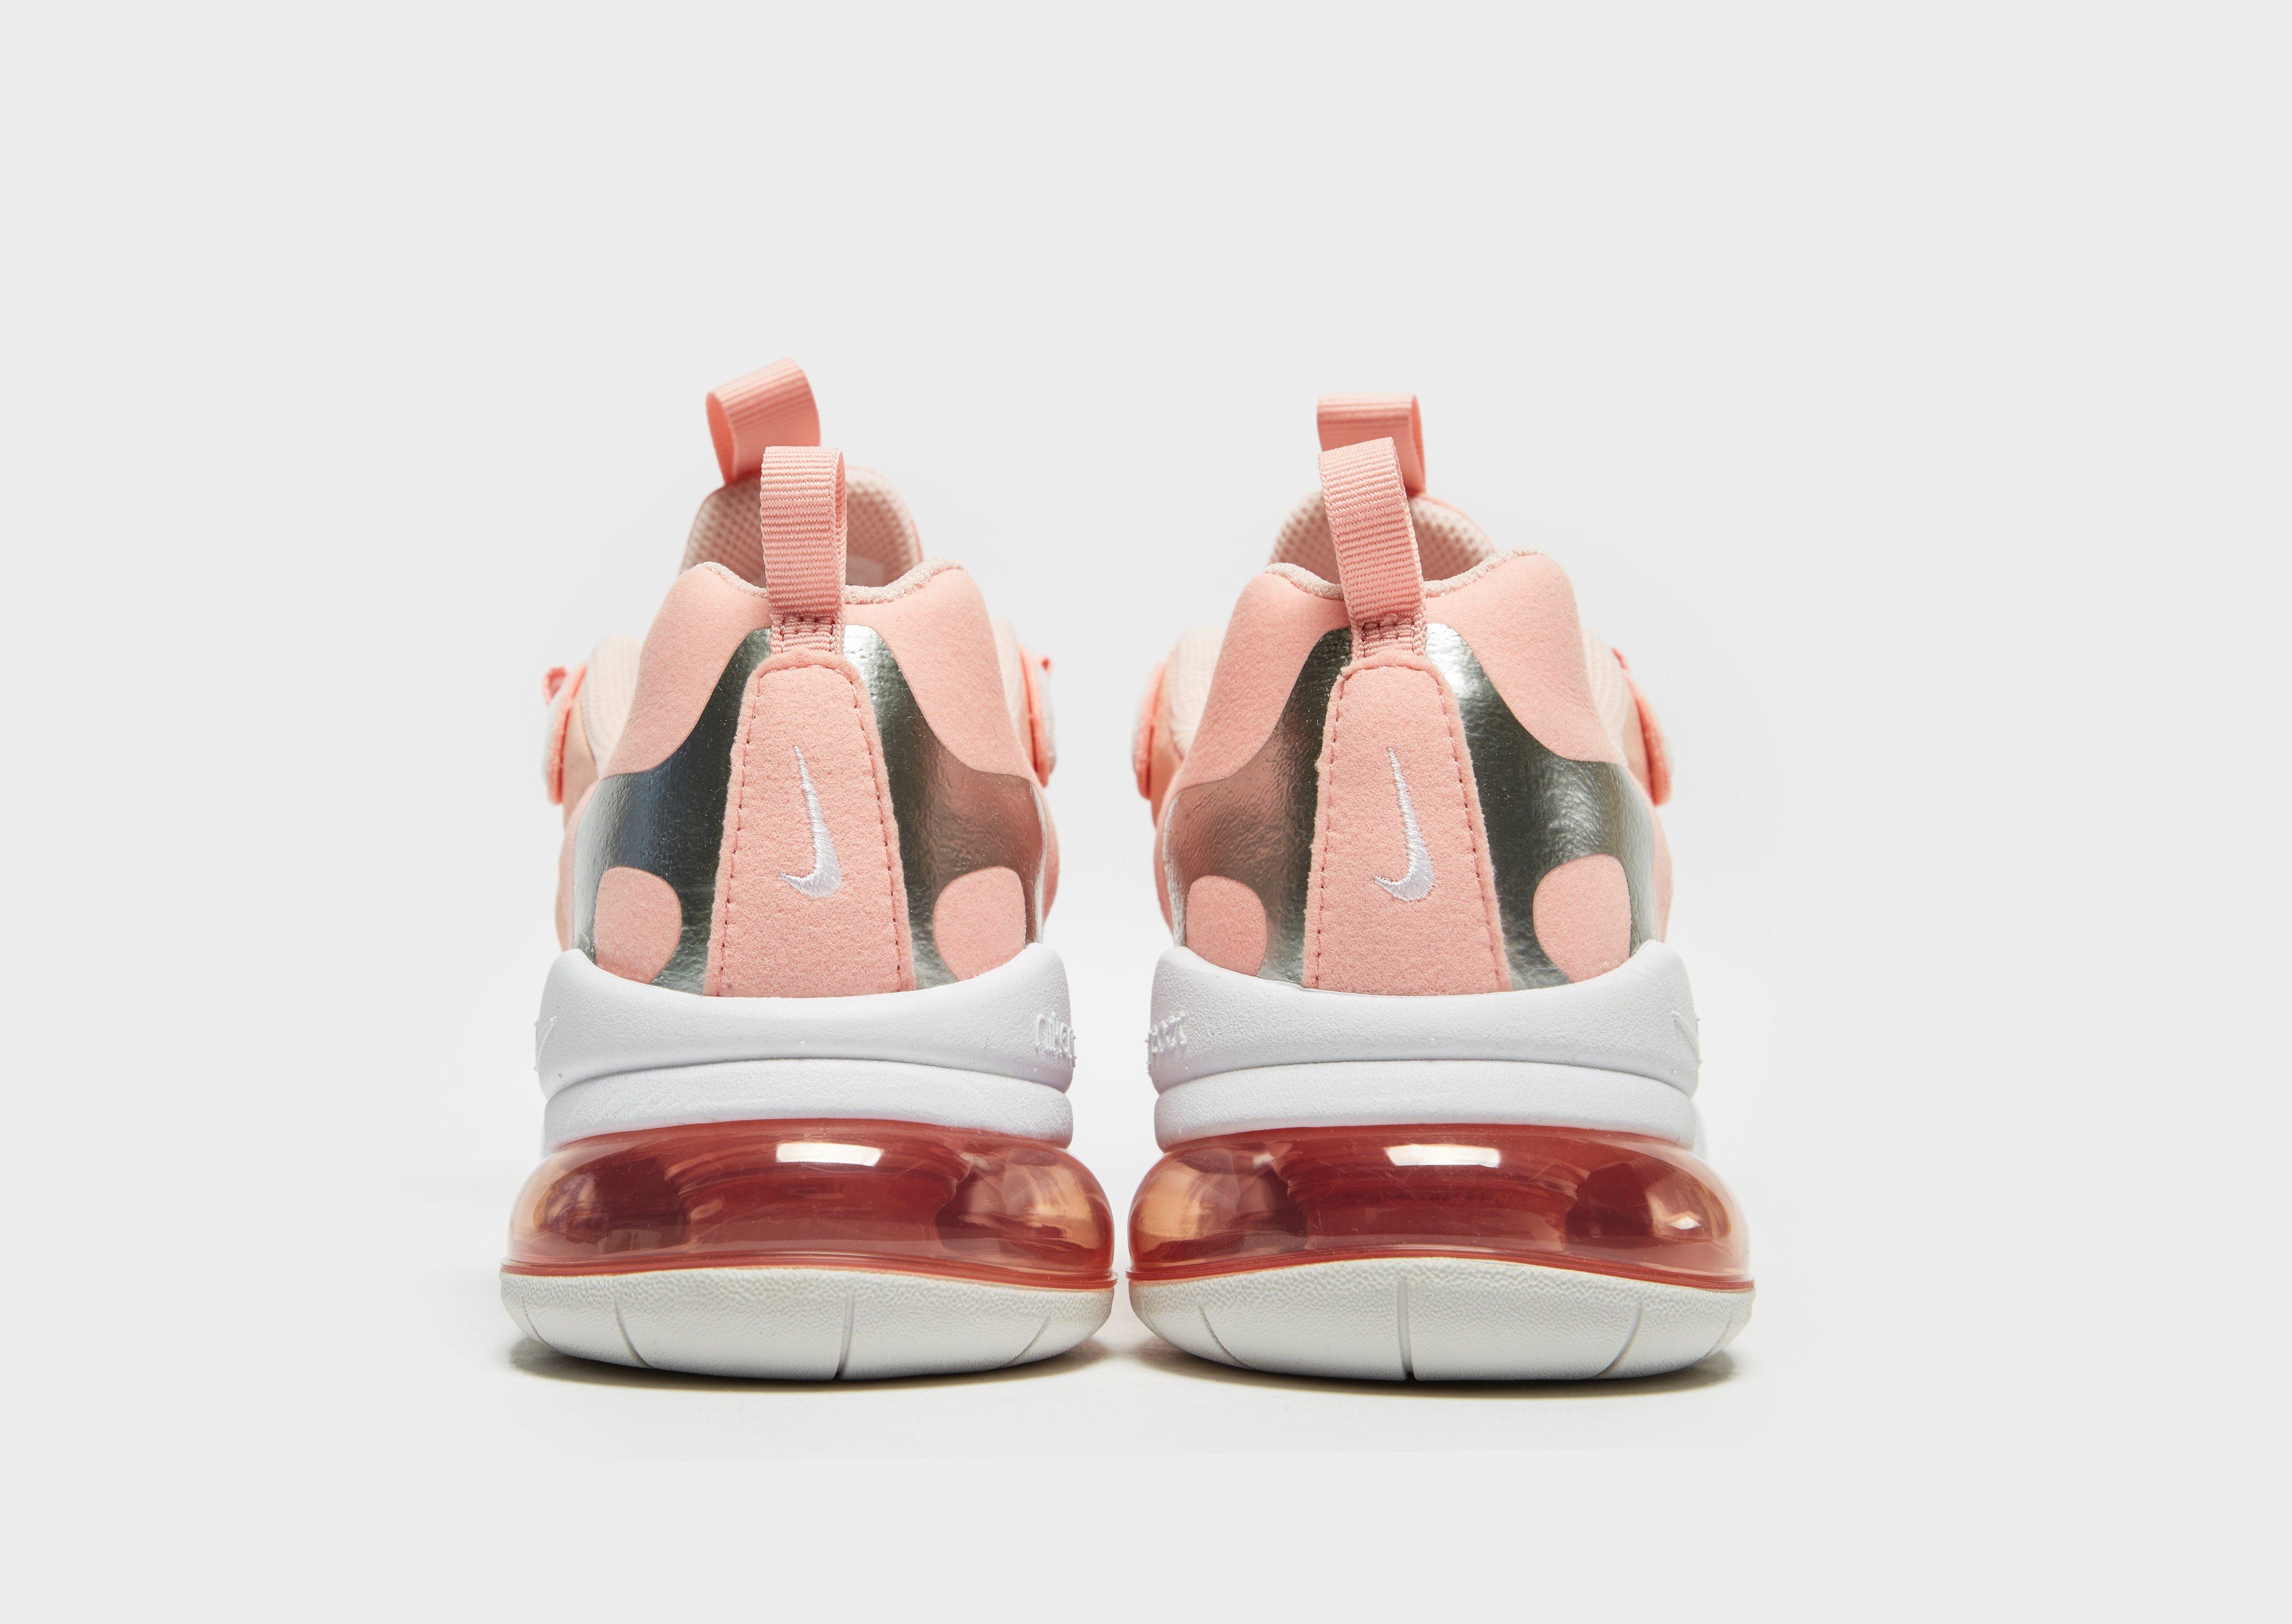 nike air max 270 junior white and pink